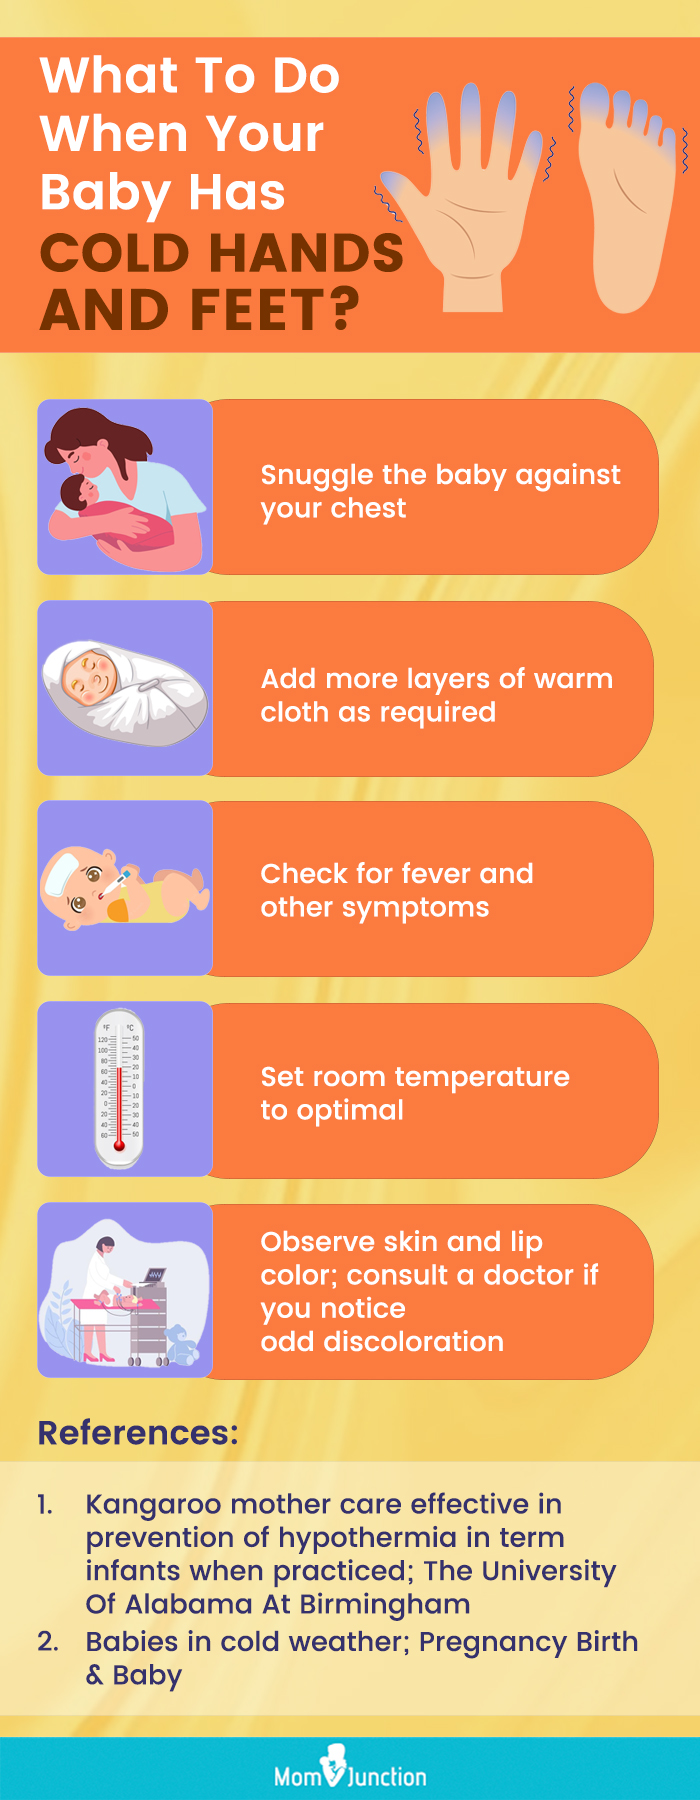 Babies in hot weather  Pregnancy Birth and Baby